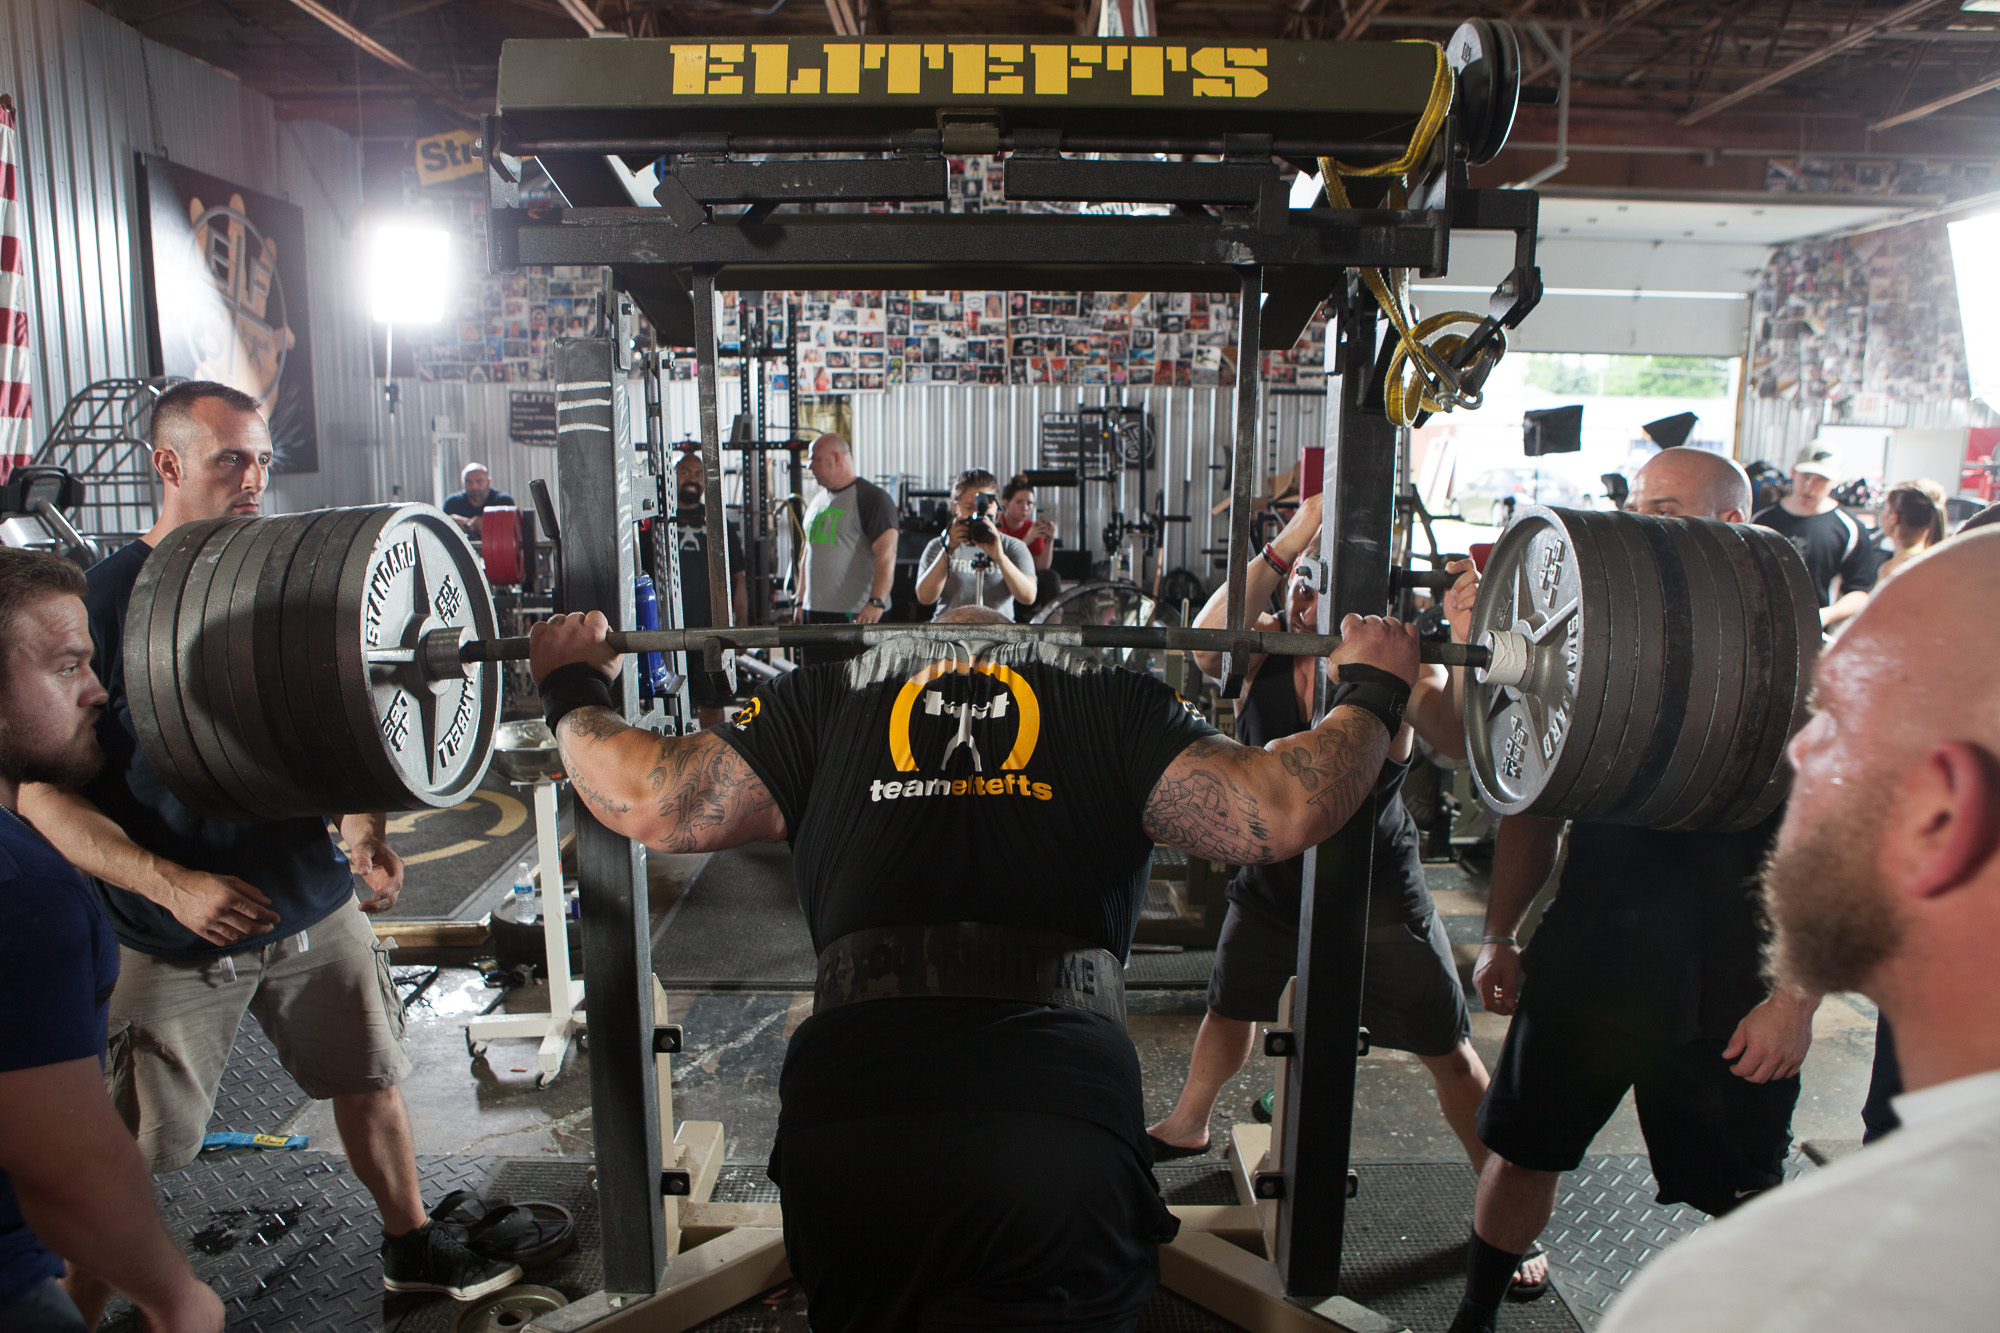 880 Squat With My, Cough*team*Cough